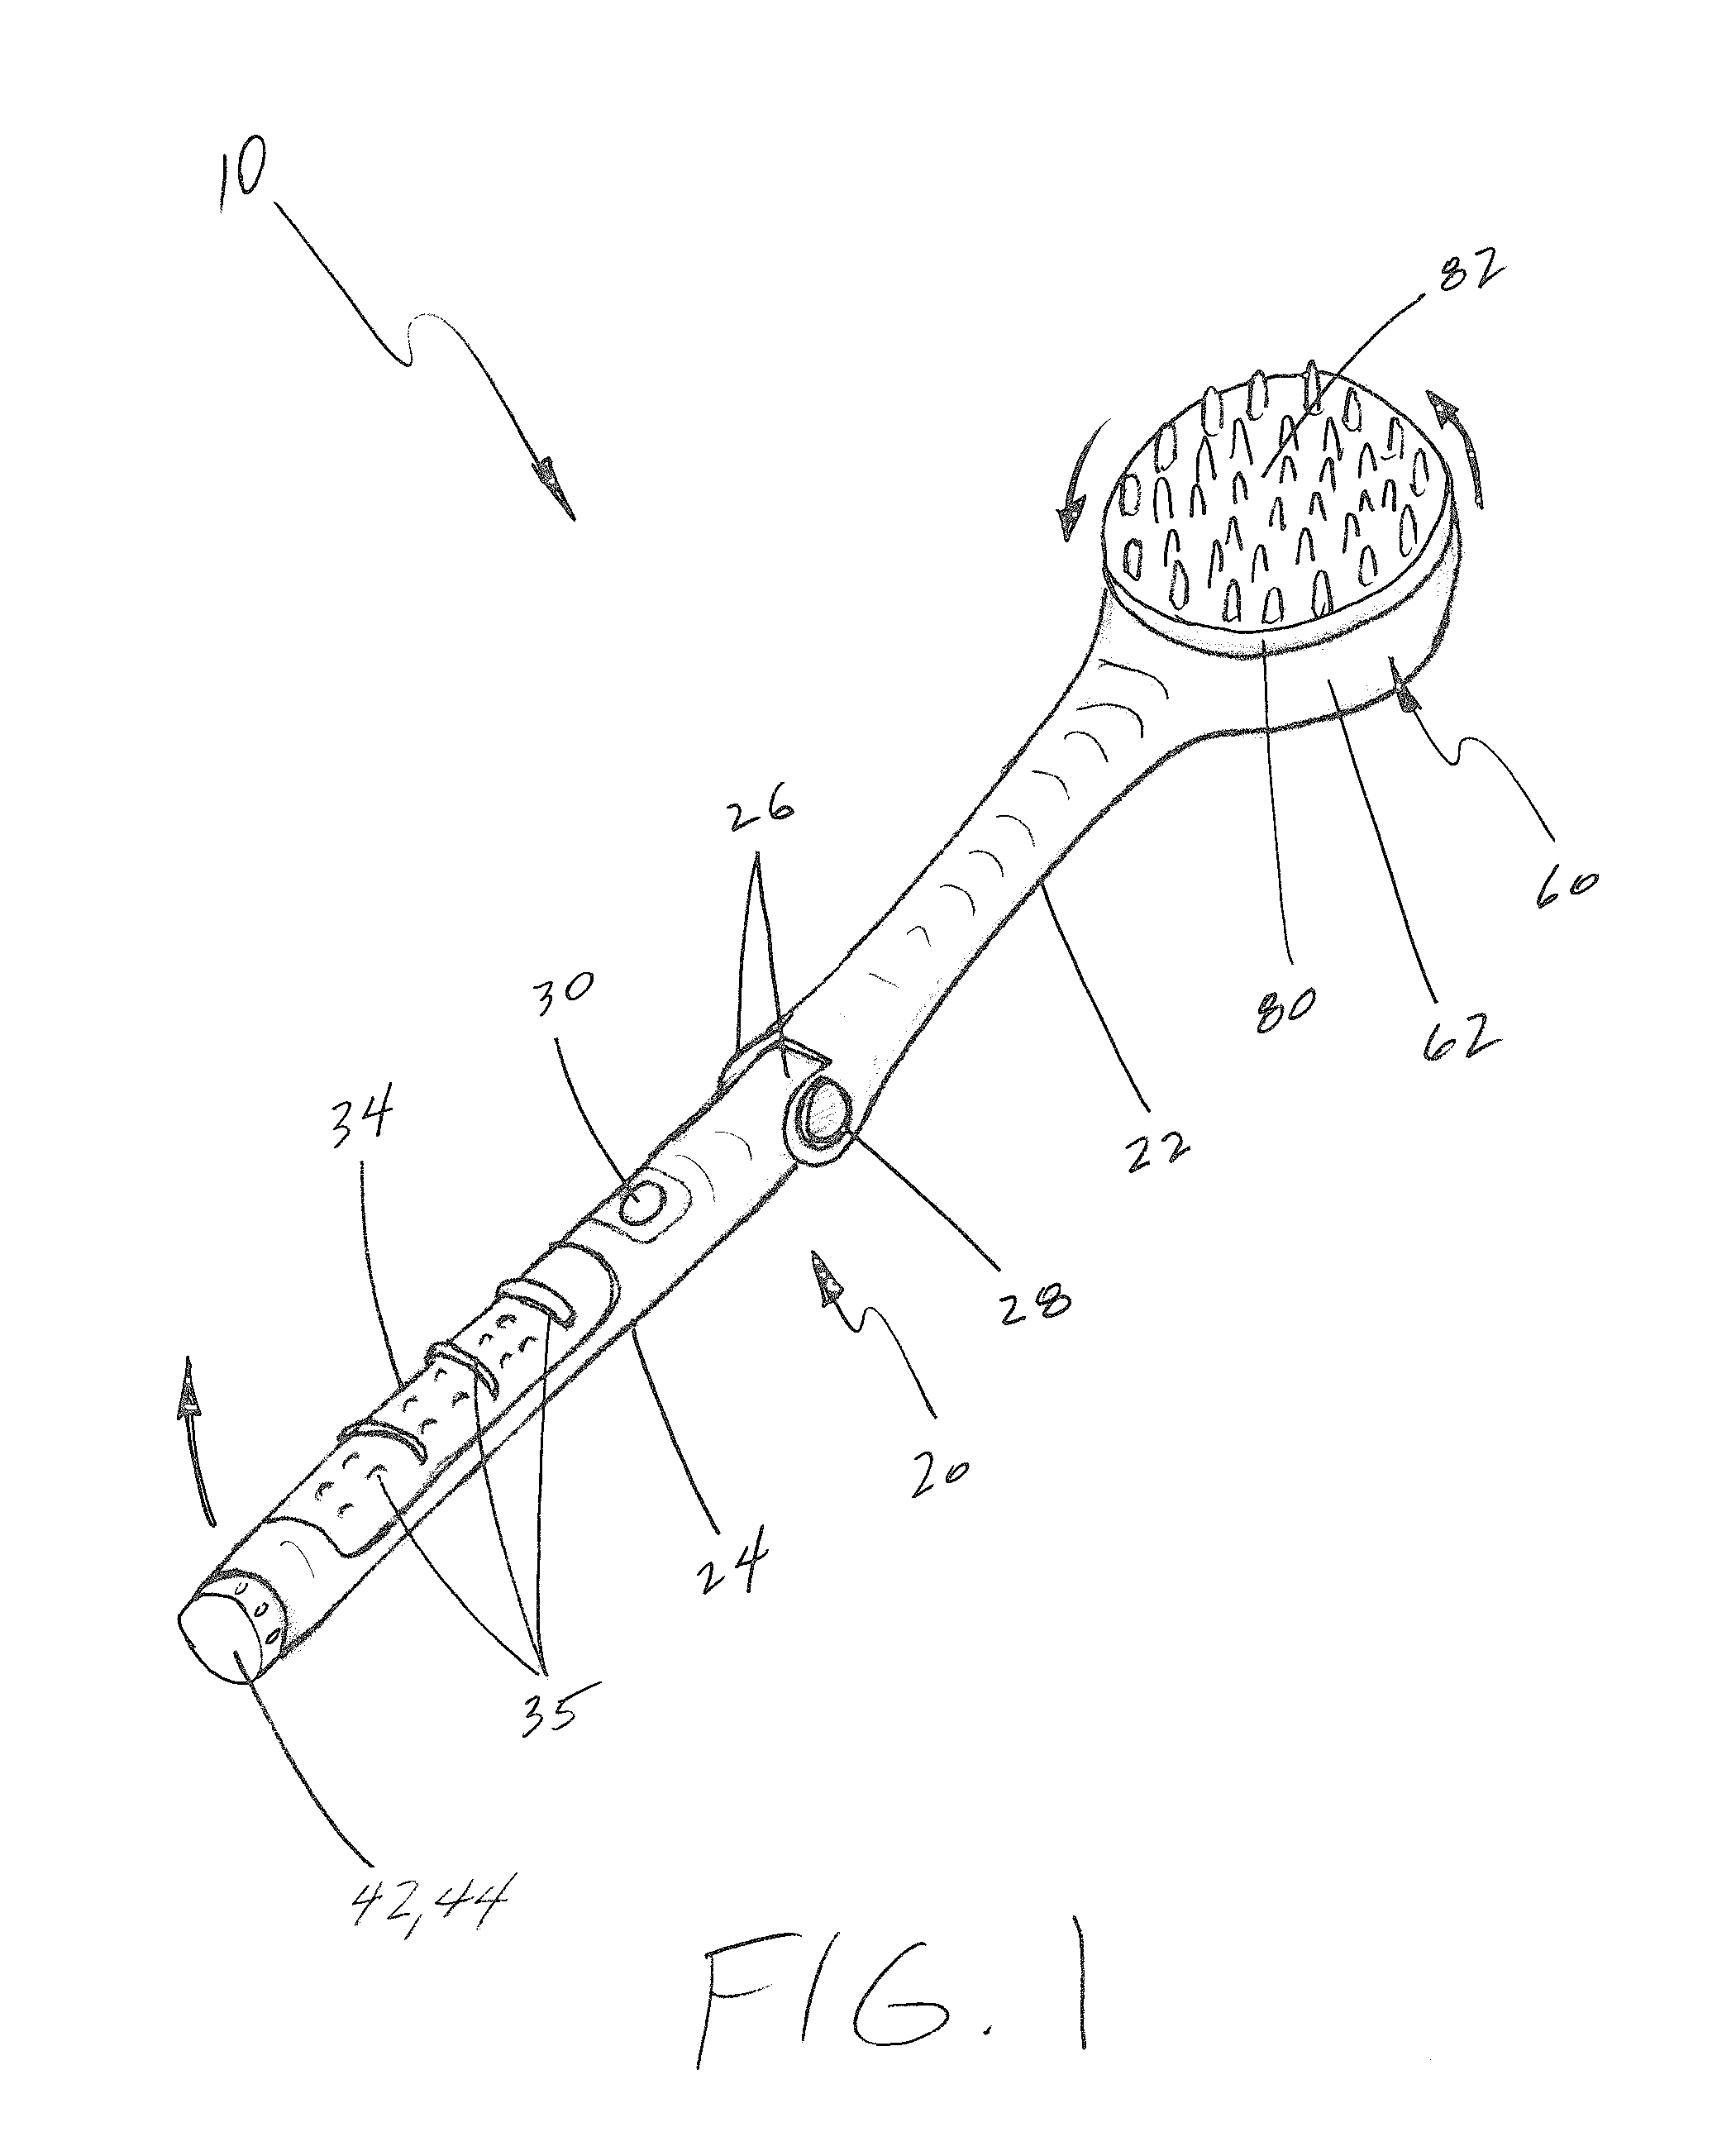 Personal cleansing and fluid application apparatus